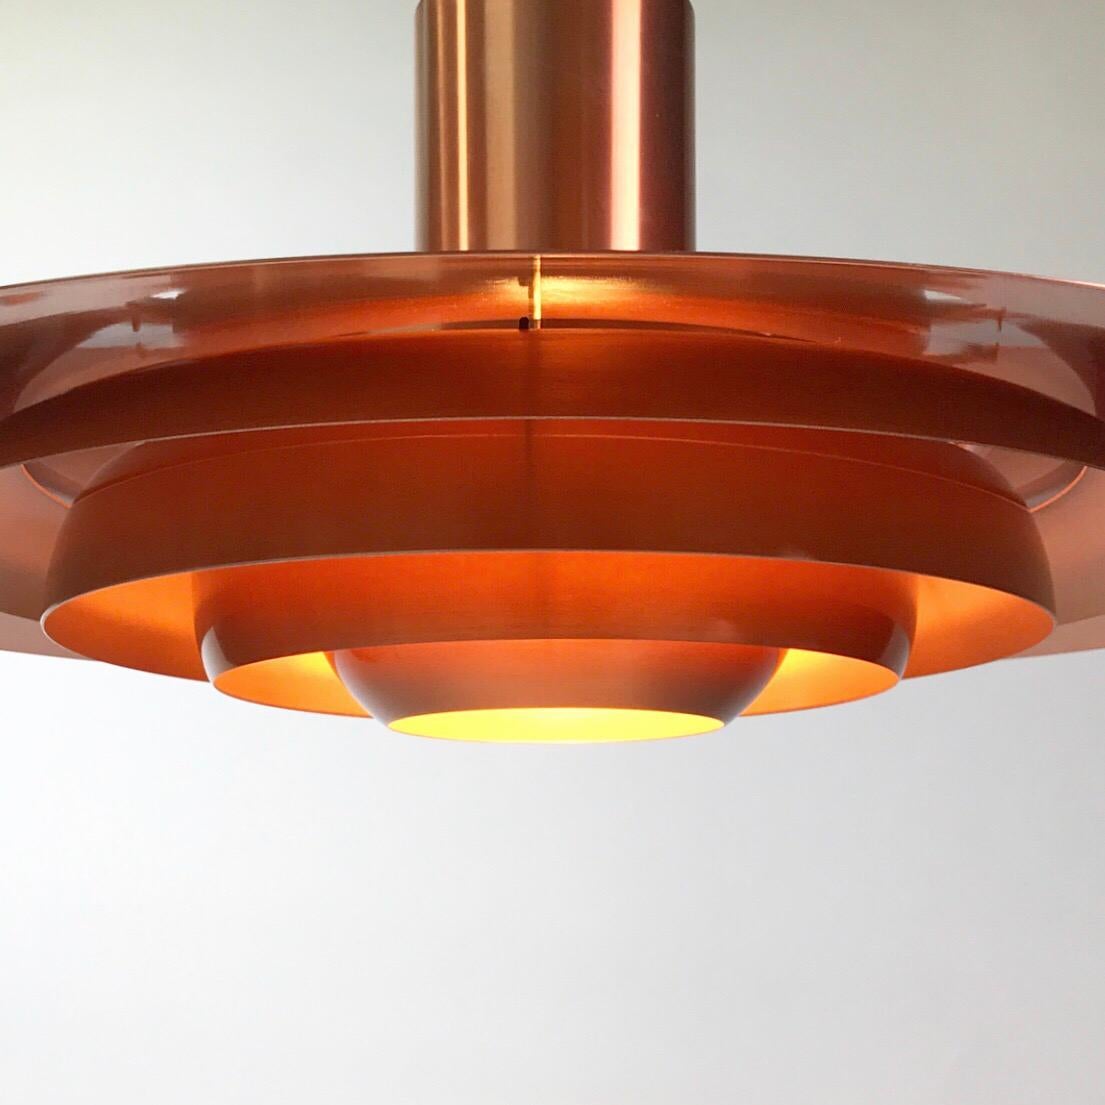 Mid-20th Century Giant Copper Ceiling Light P700 by Kastholm & Fabricius for Nordisk Solar 1964